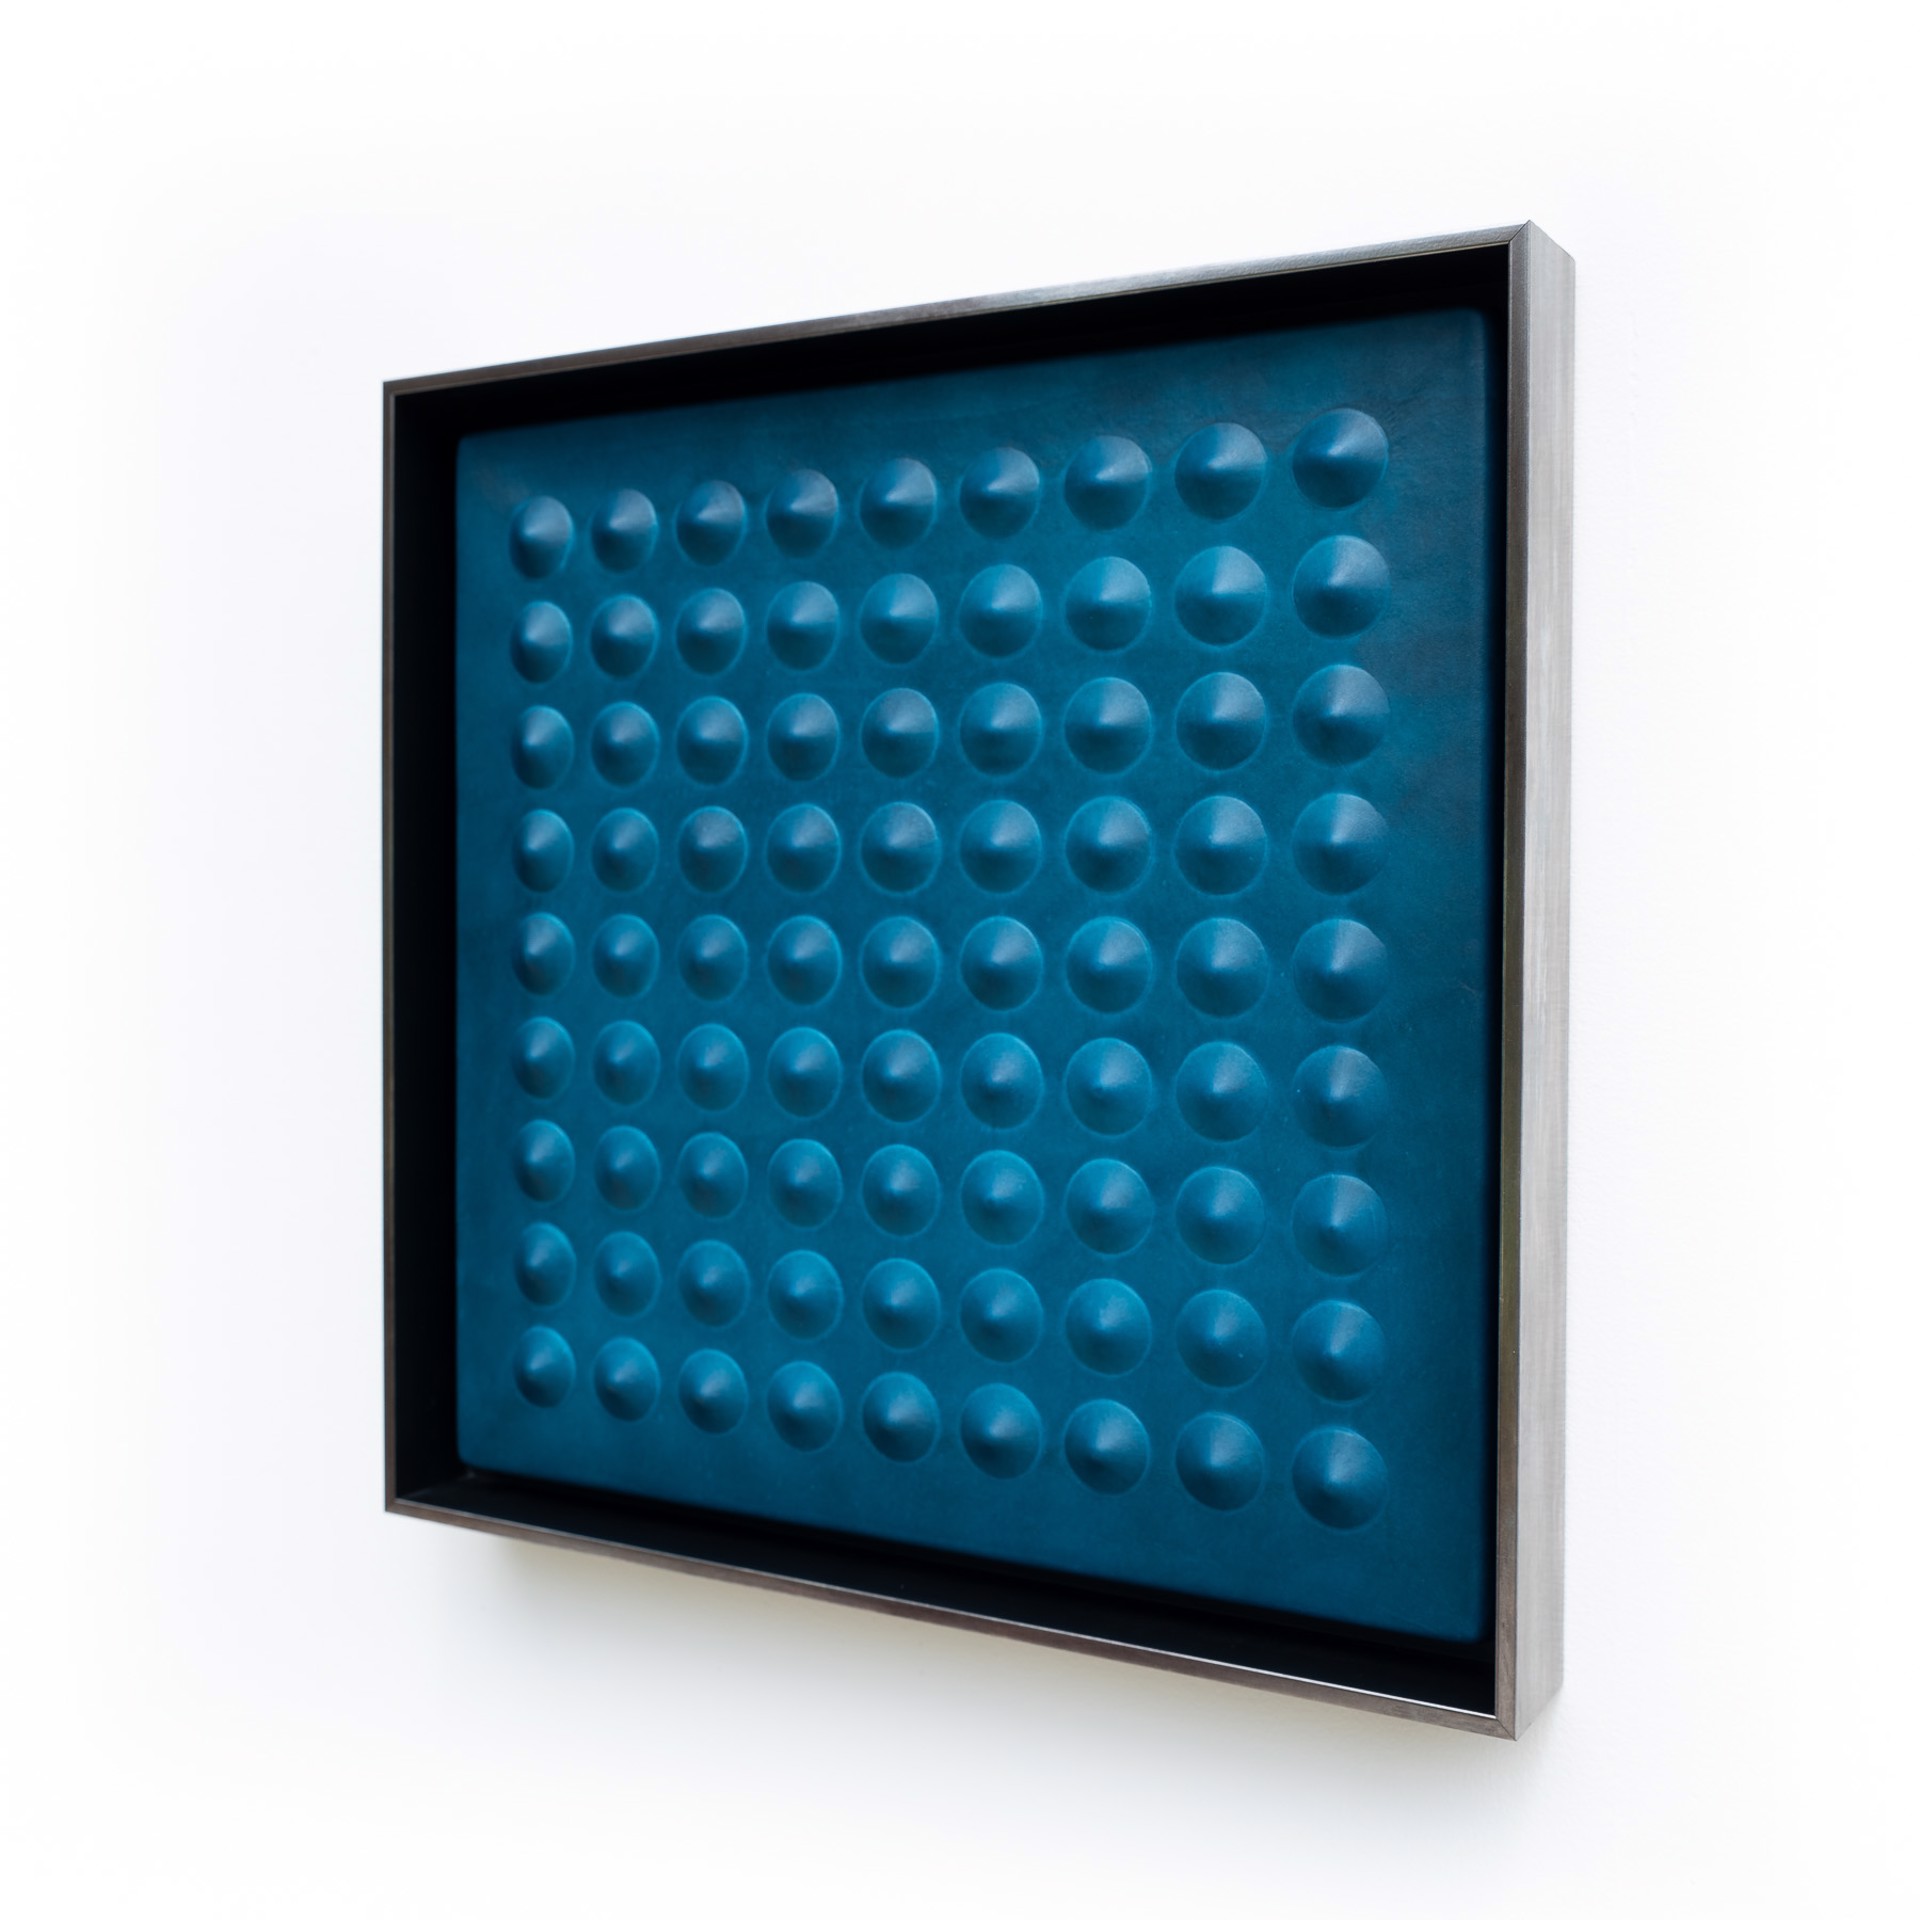 'Square (Teal)' - Sexy Stud series by Mx. Hyde